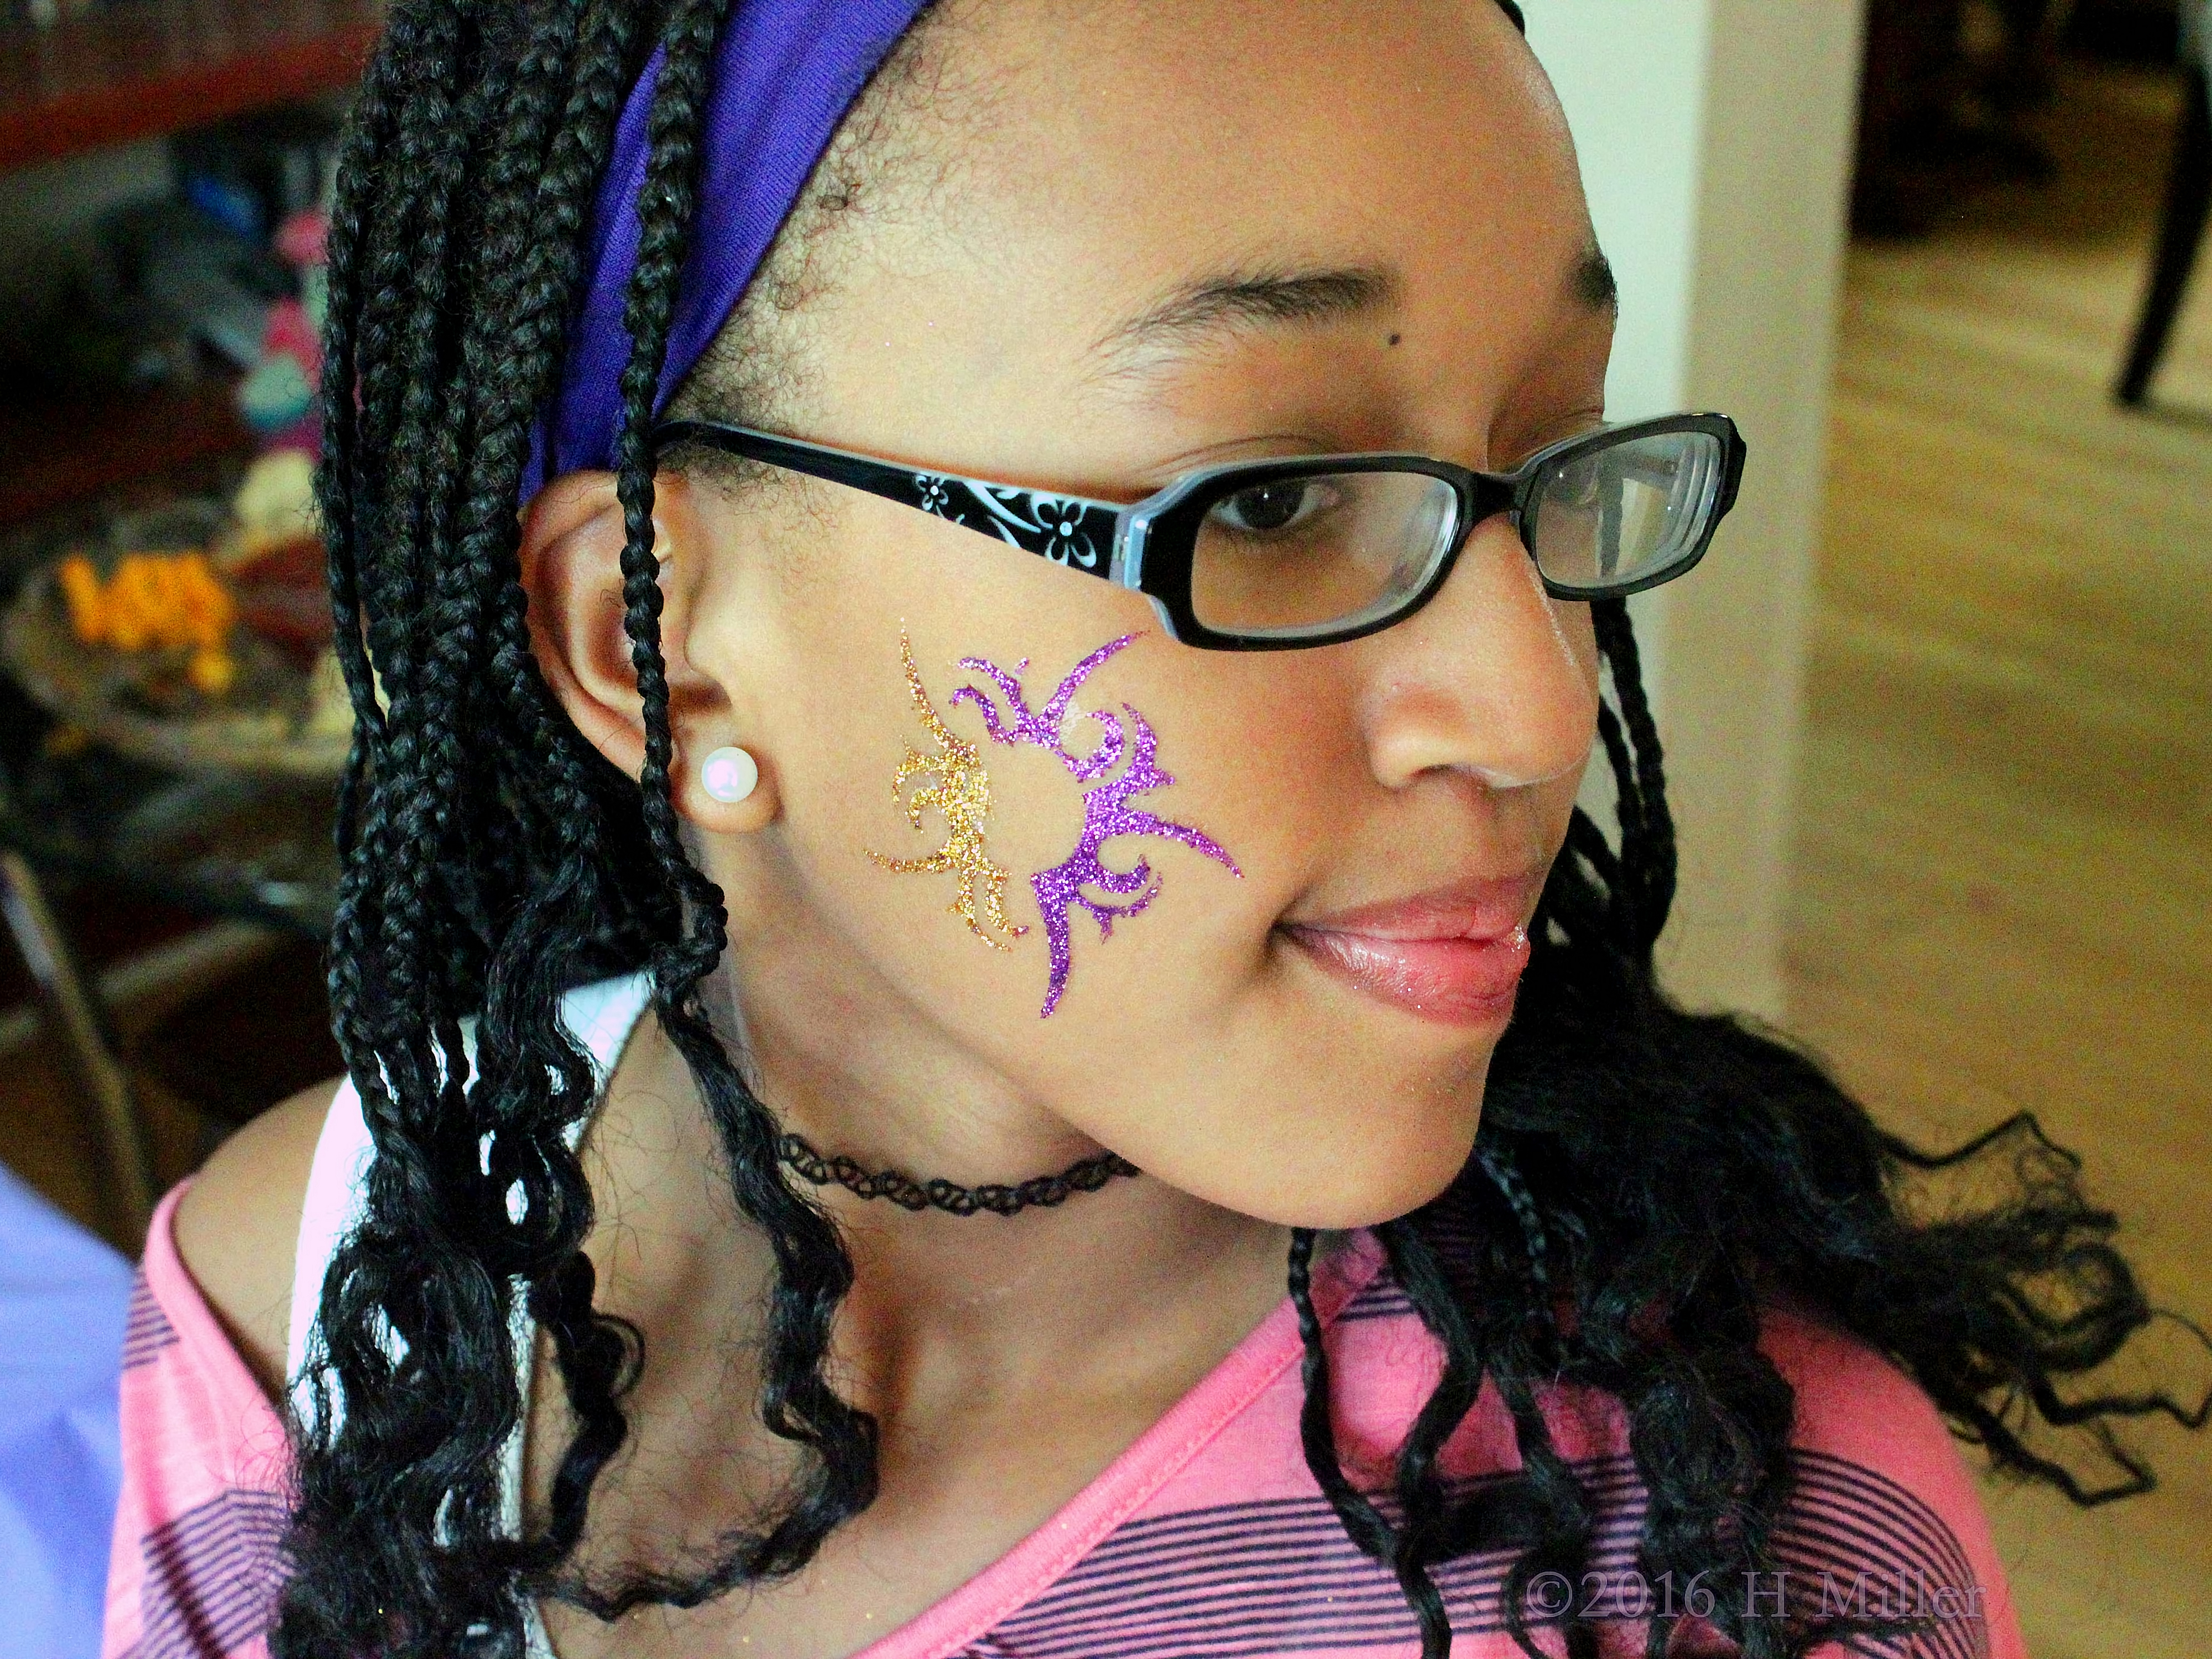 Cute Glitter Temporary Tattoos At The Kids Spa Party 